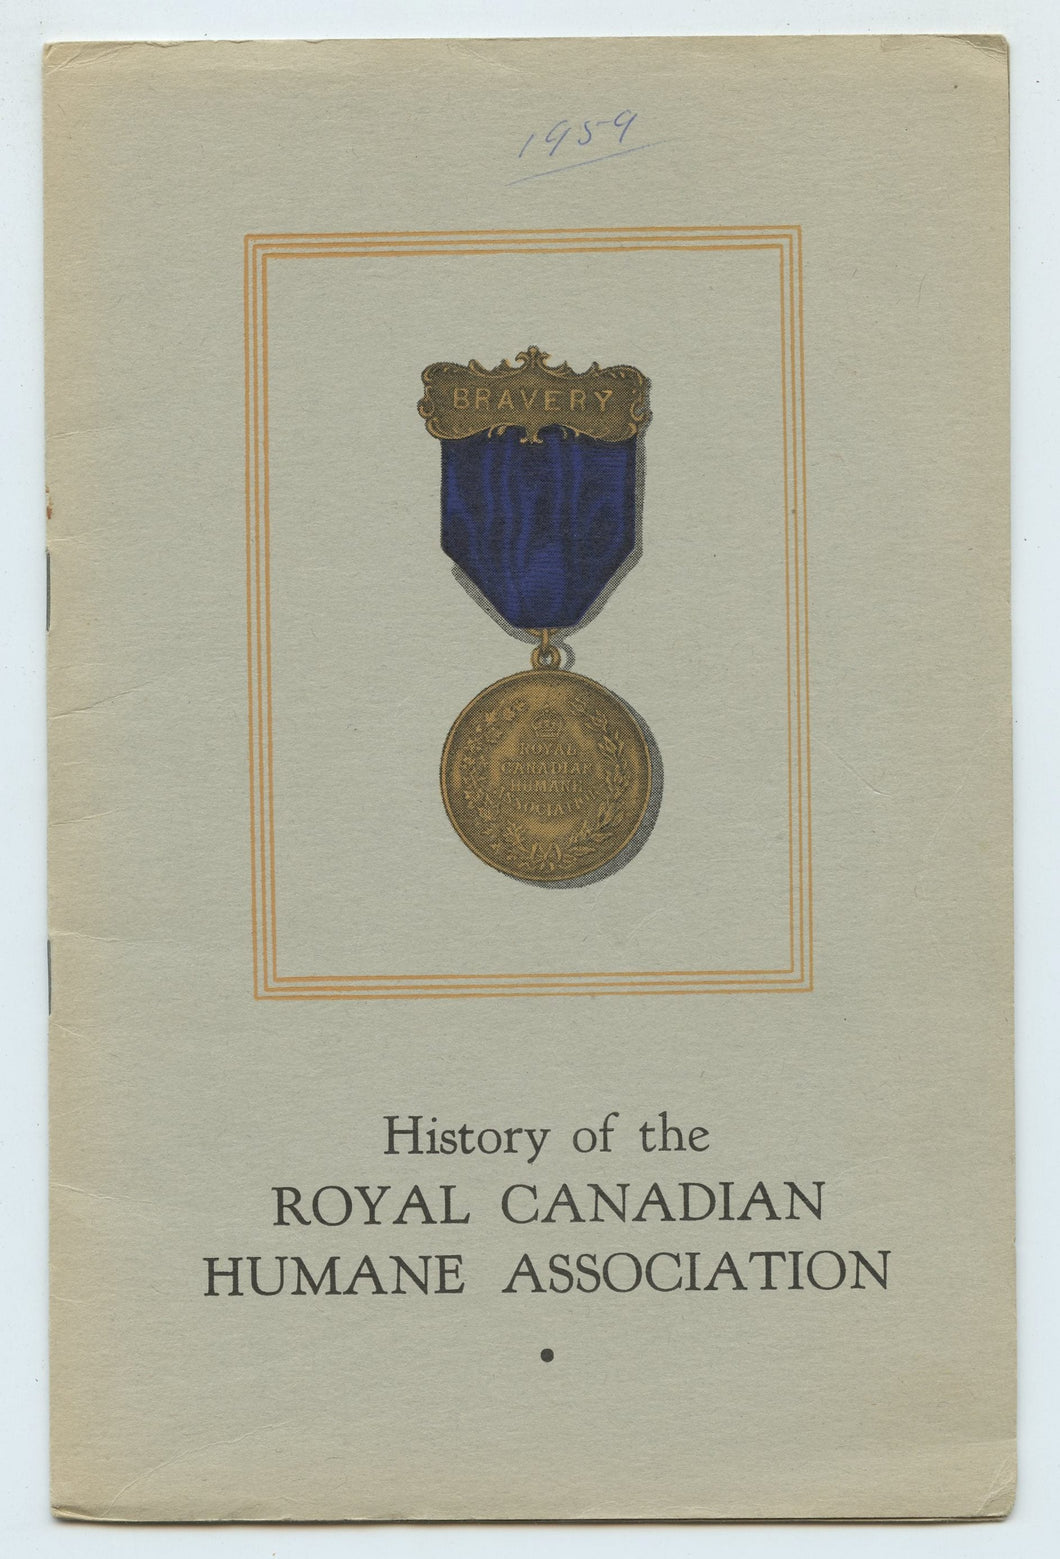 History of the Royal Canadian Humane Association